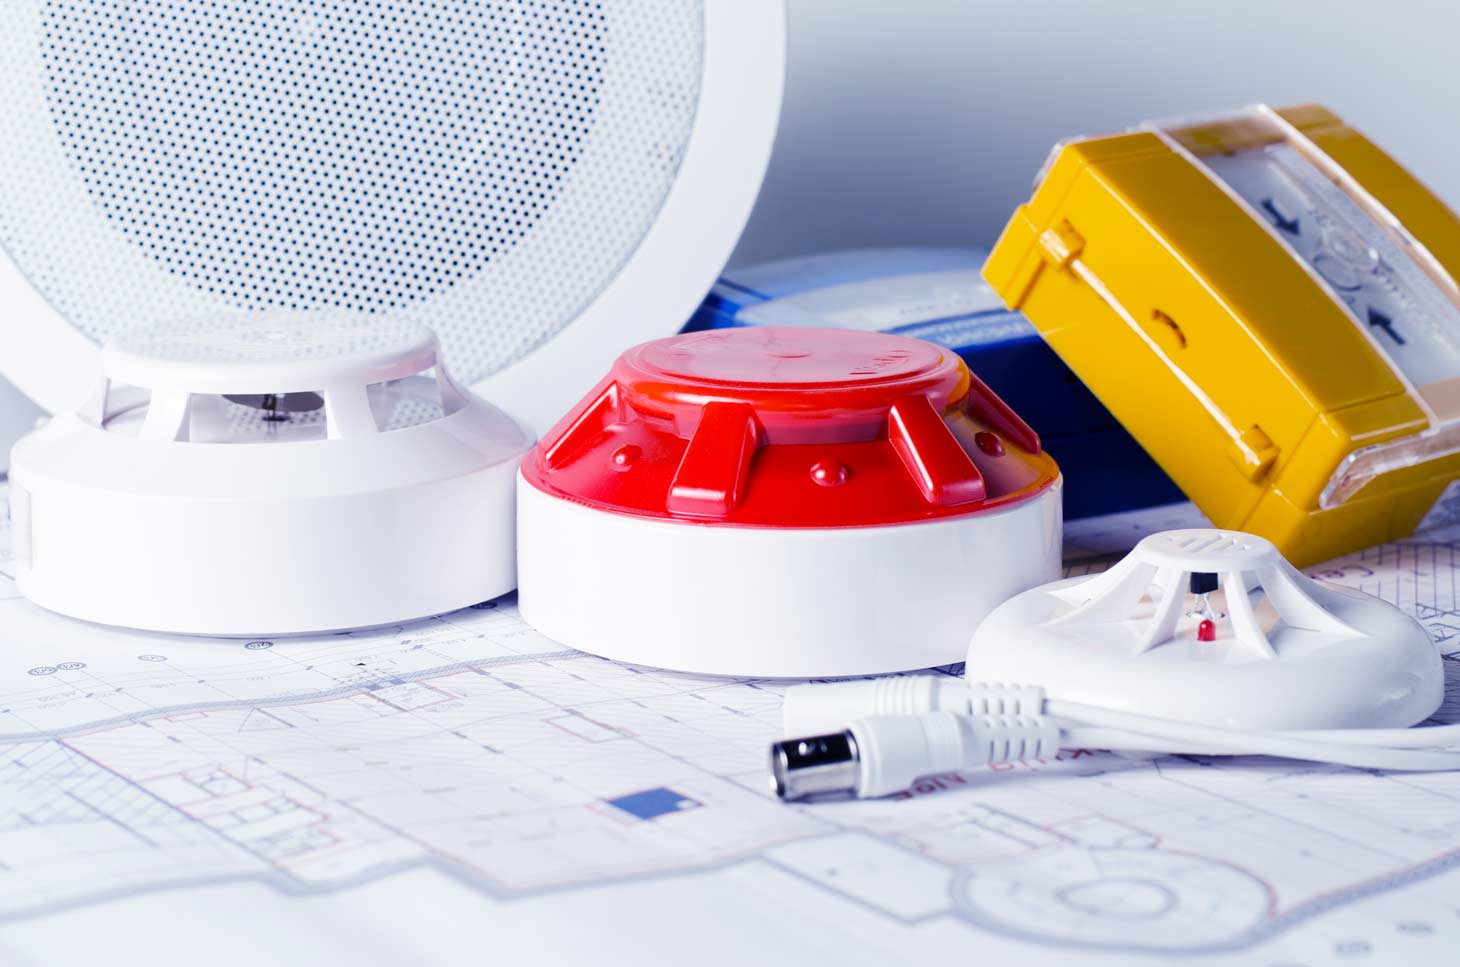 Fire alarm and smoke detectors for a security business